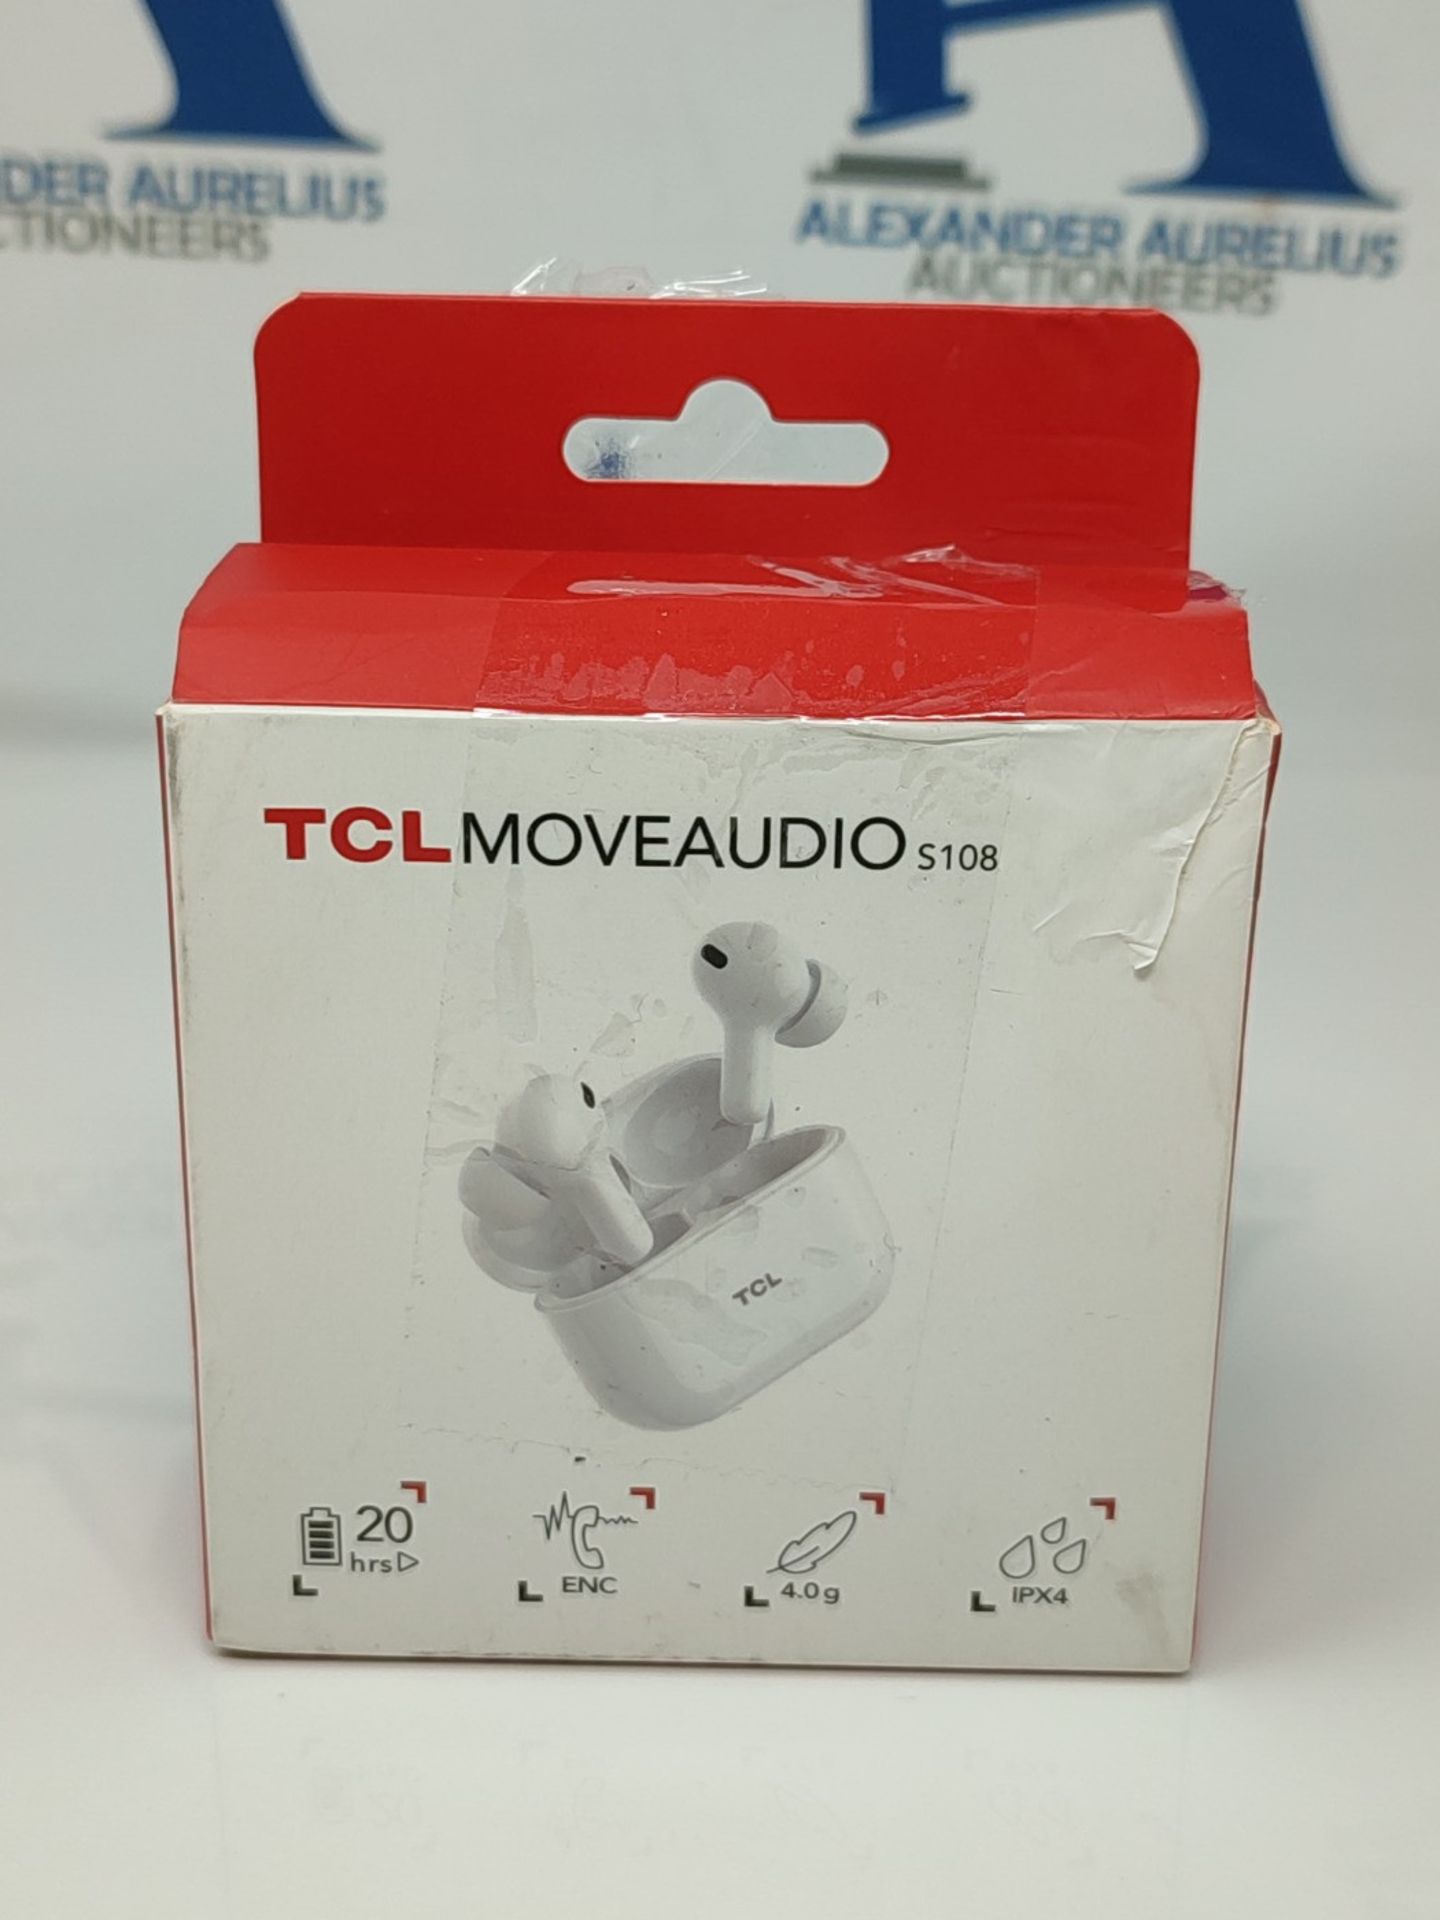 TCL - Moveaudio S108 Wireless headphones (noise cancellation with ENC technology, Blue - Image 2 of 3